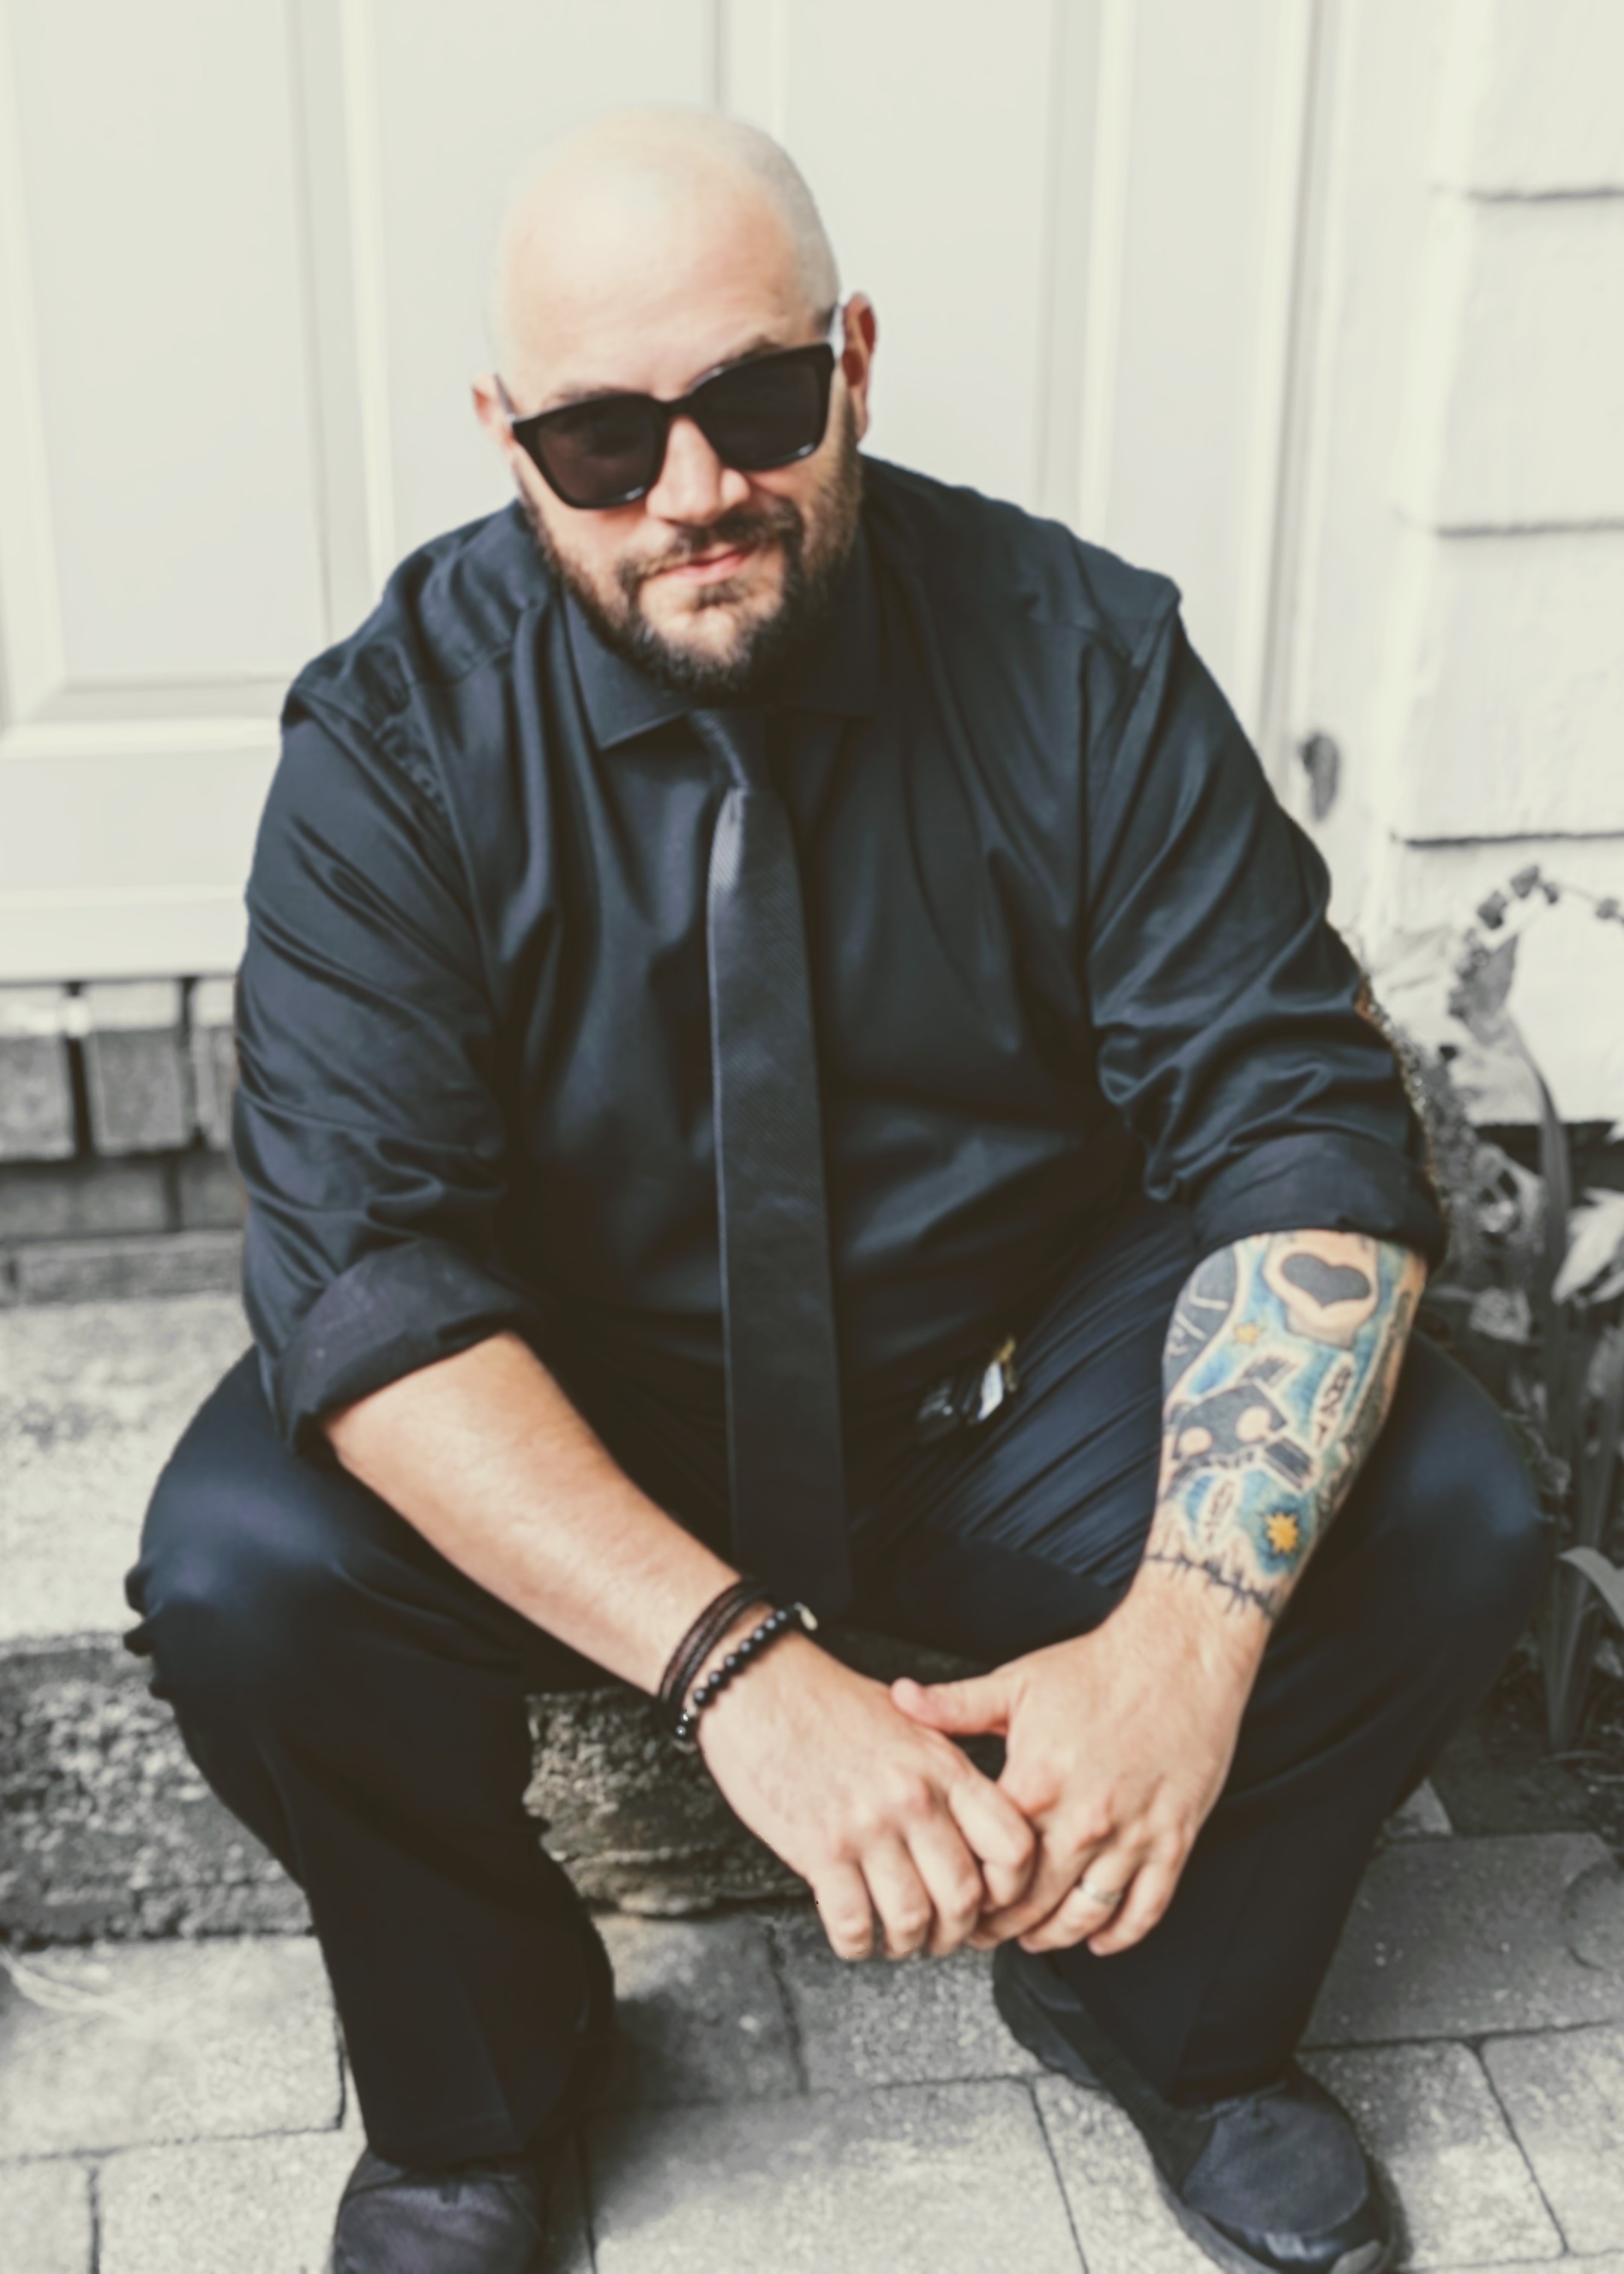 A white man sits on a front step. He is bald with a black beard and mustache. He is wearing black sunglasses, a black dress shirt and tie, black trousers, and black pants. He has a tattoo sleeve on his left arm.